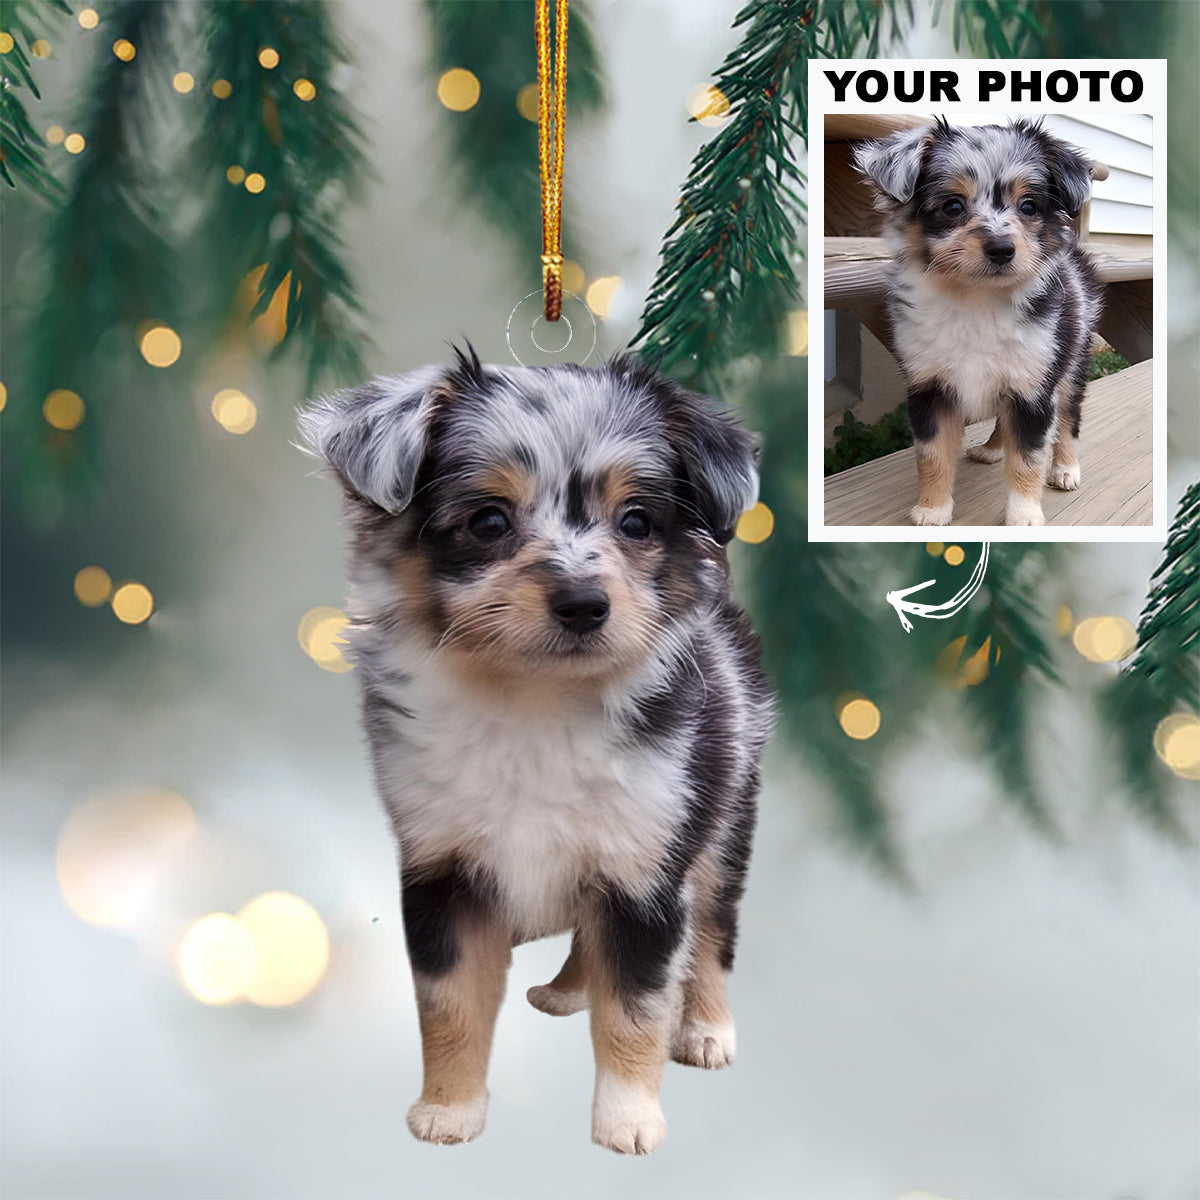 Personalized Photo Mica Ornament - Christmas Gift For Family Member, Friends -  Customized Your Photo Ornament Dog Ornament